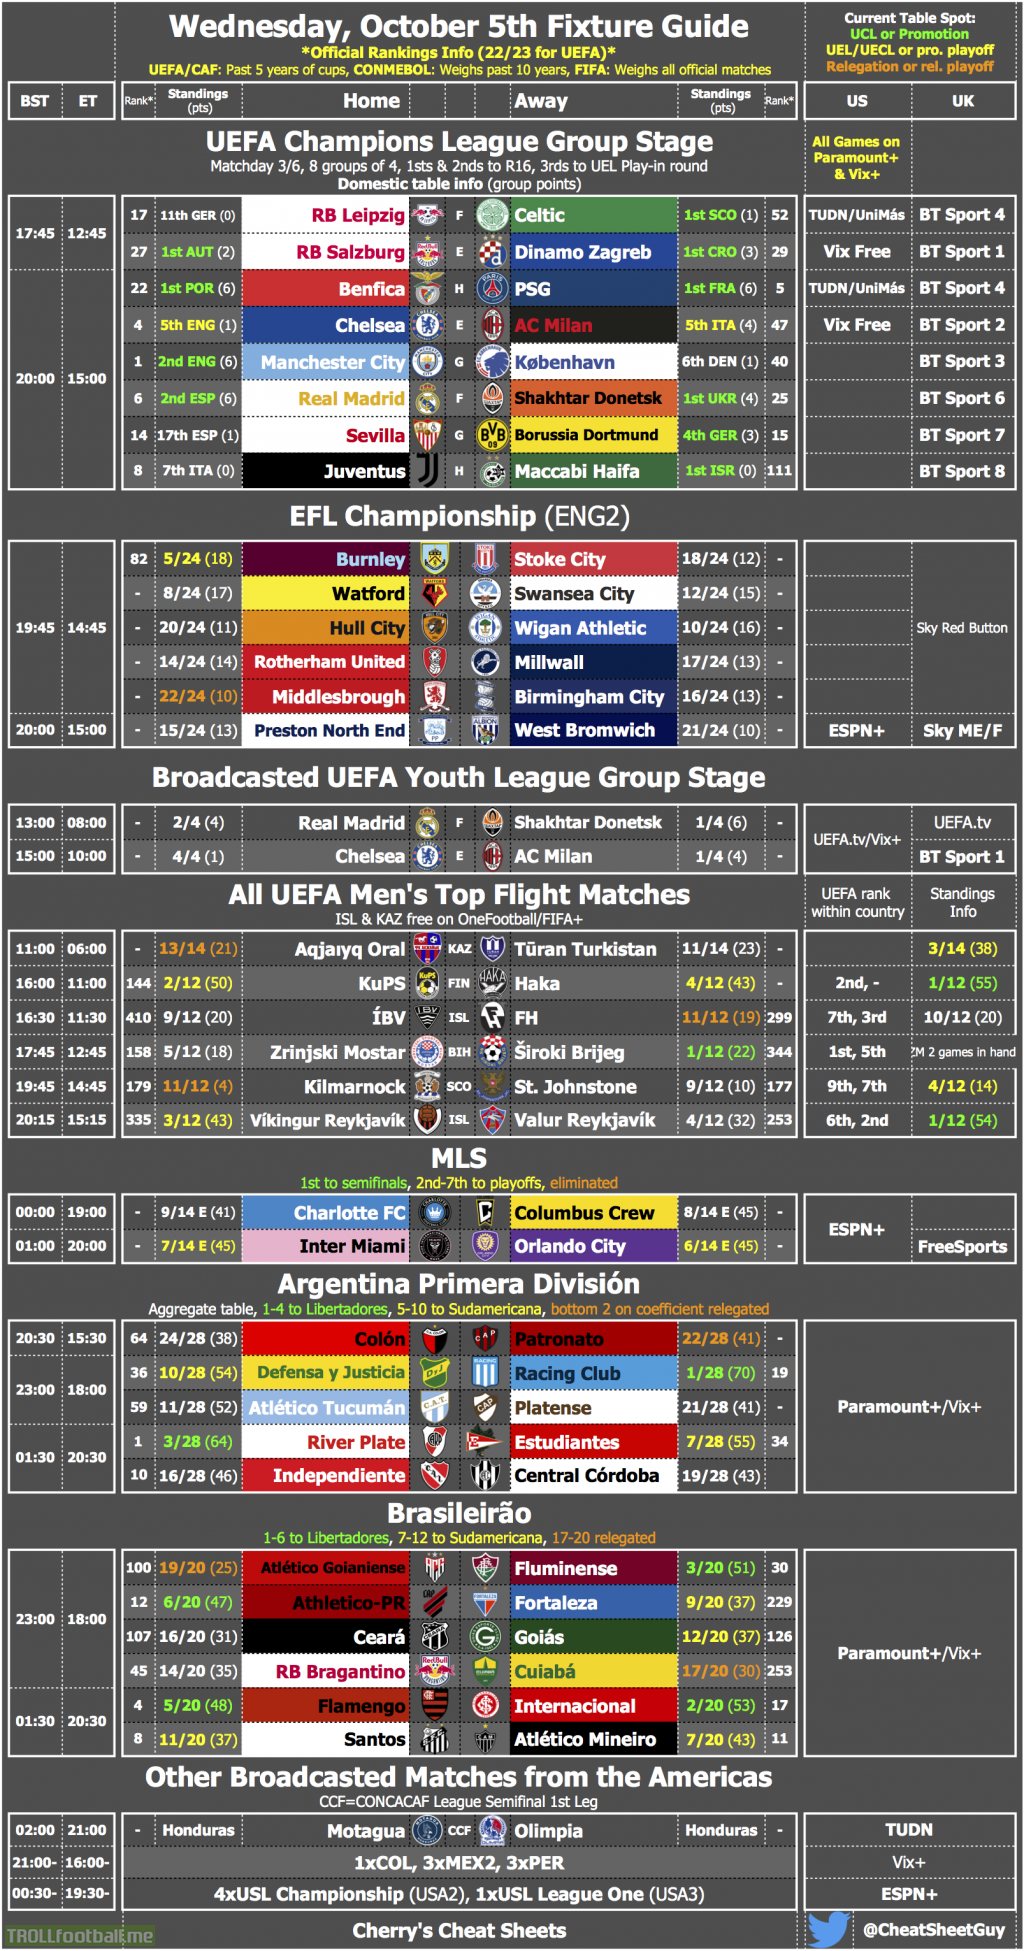 [OC] Cherry's Fixture Guide & TV Cheat Sheet for Tuesday